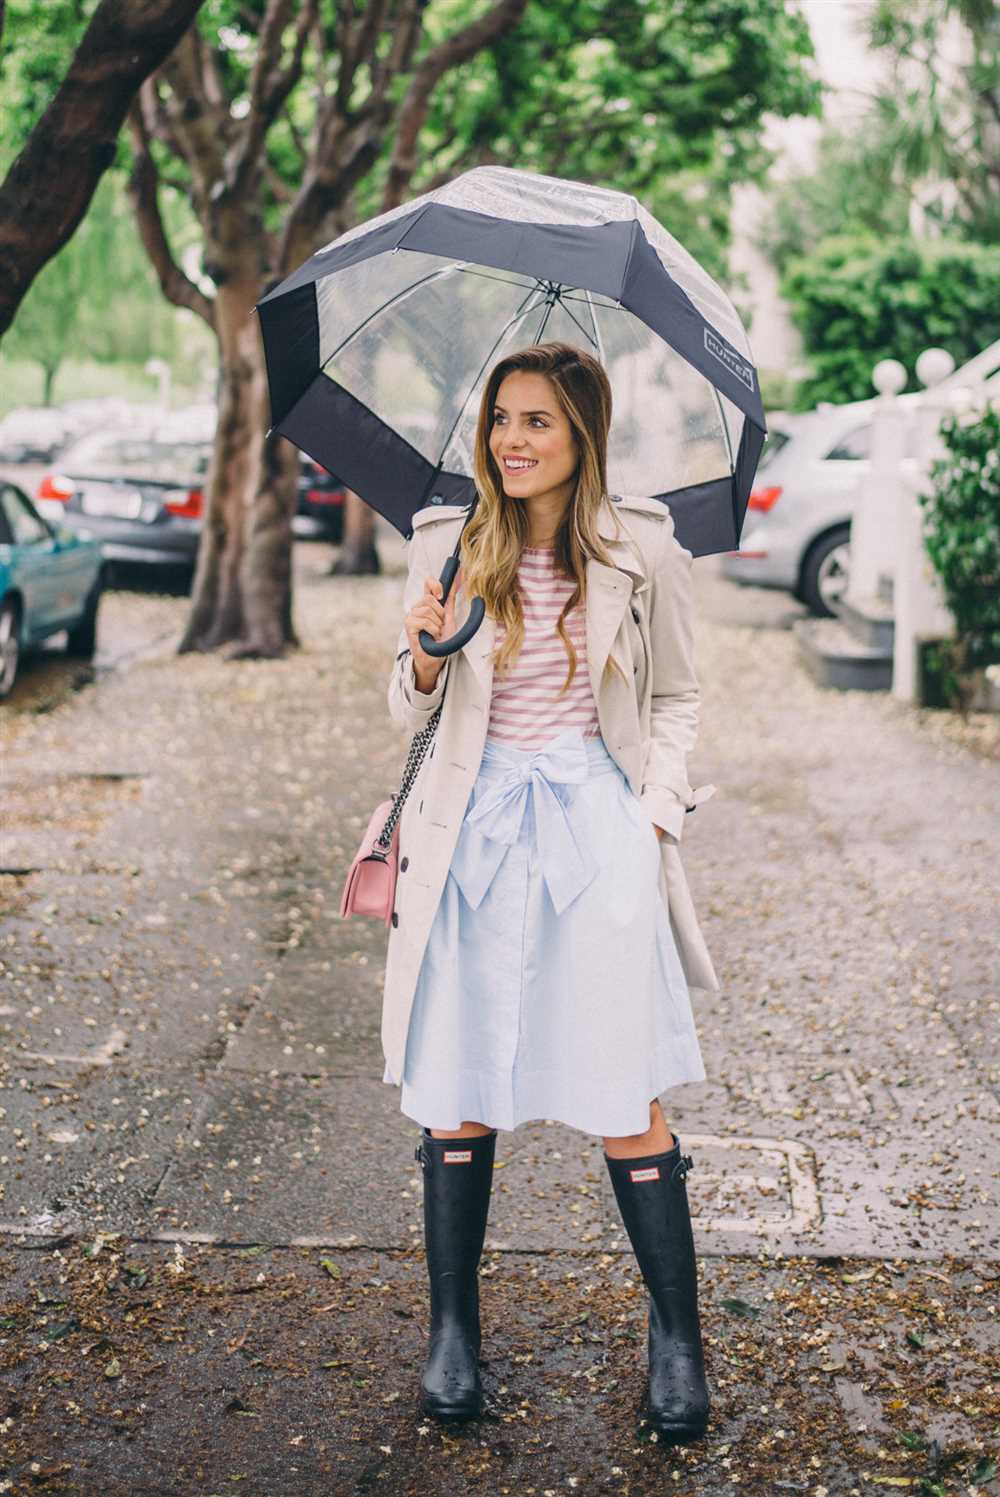 The Versatility of Hunter Boots